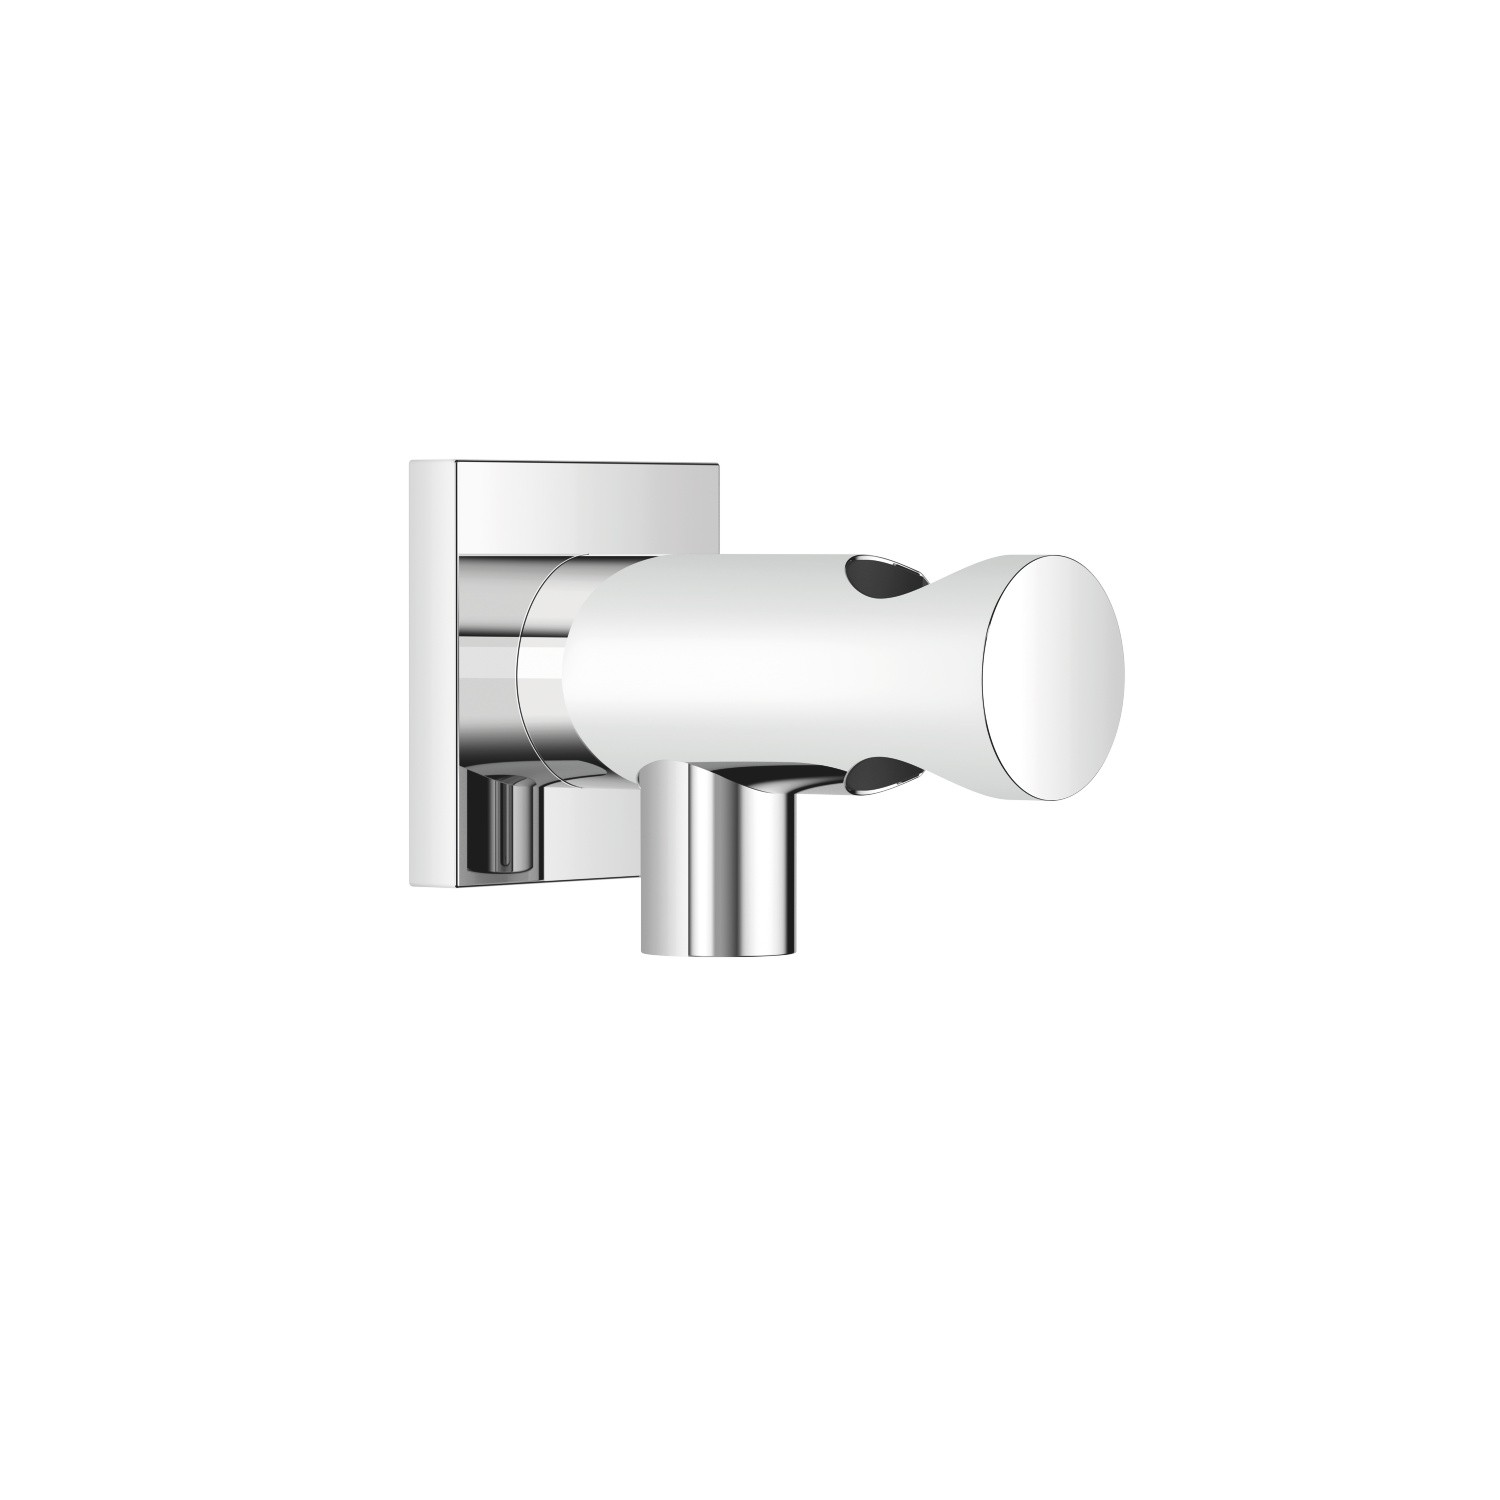 DORNBRACHT 28490970 SQUARE FLANGE 2 3/8 INCH WALL ELBOW WITH INTEGRATED WALL BRACKET